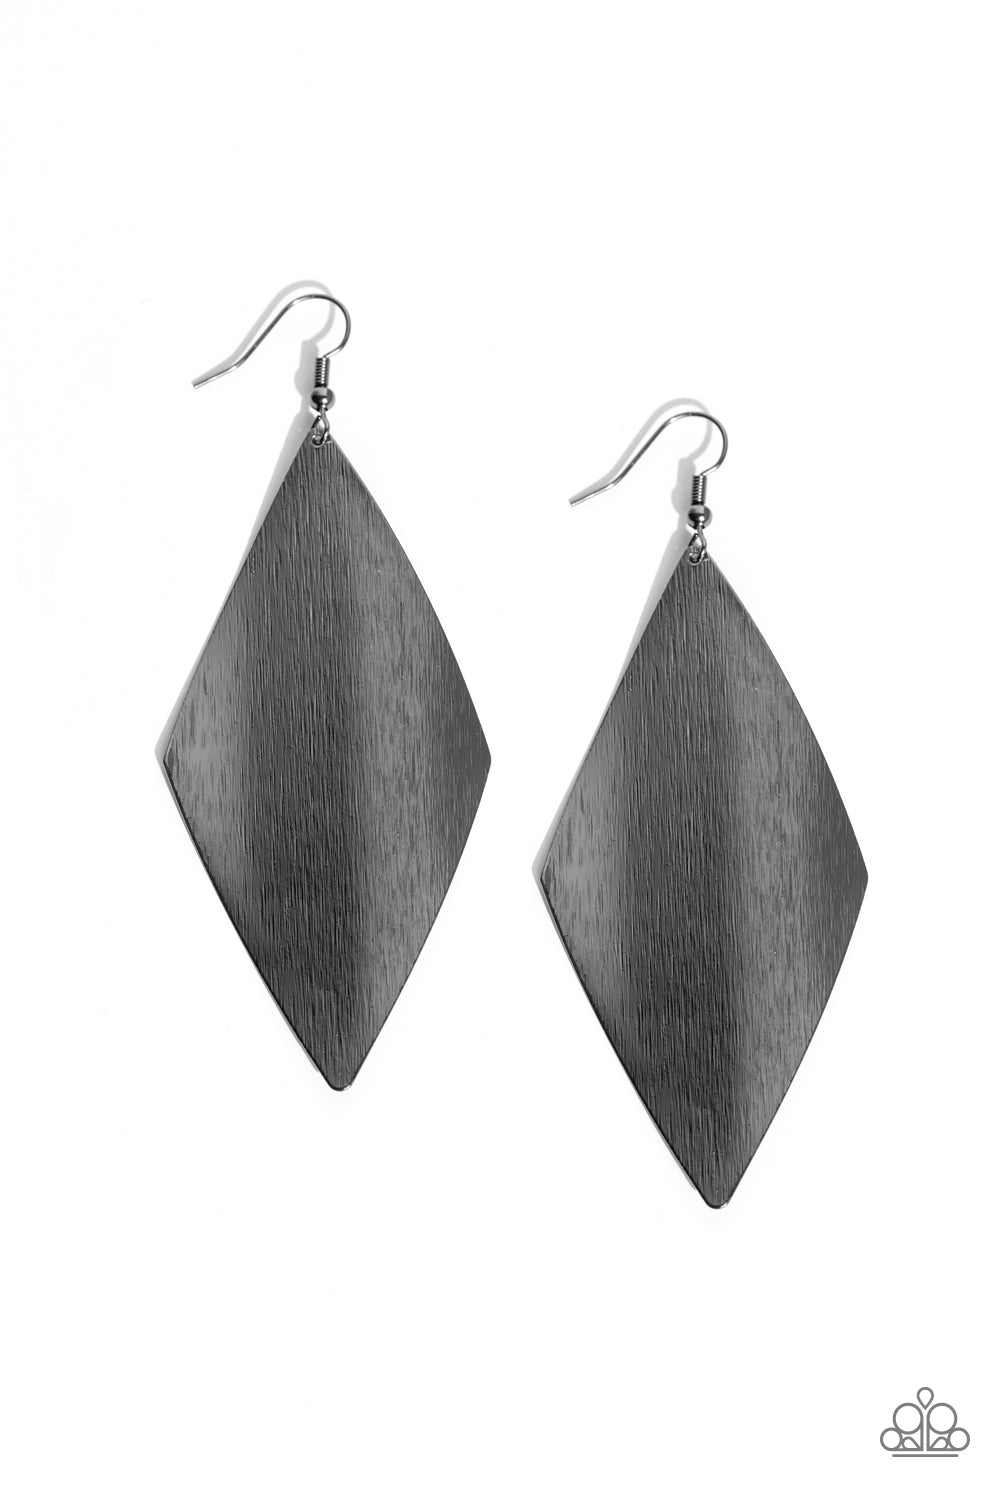 Paparazzi Accessories - Retro Rally - Black Earrings etched in shimmer, a kite-shaped gunmetal frame delicately folds and ripples as it falls from the ear for an edgy vibe. Earring attaches to a standard fishhook fitting.  Sold as one pair of earrings.